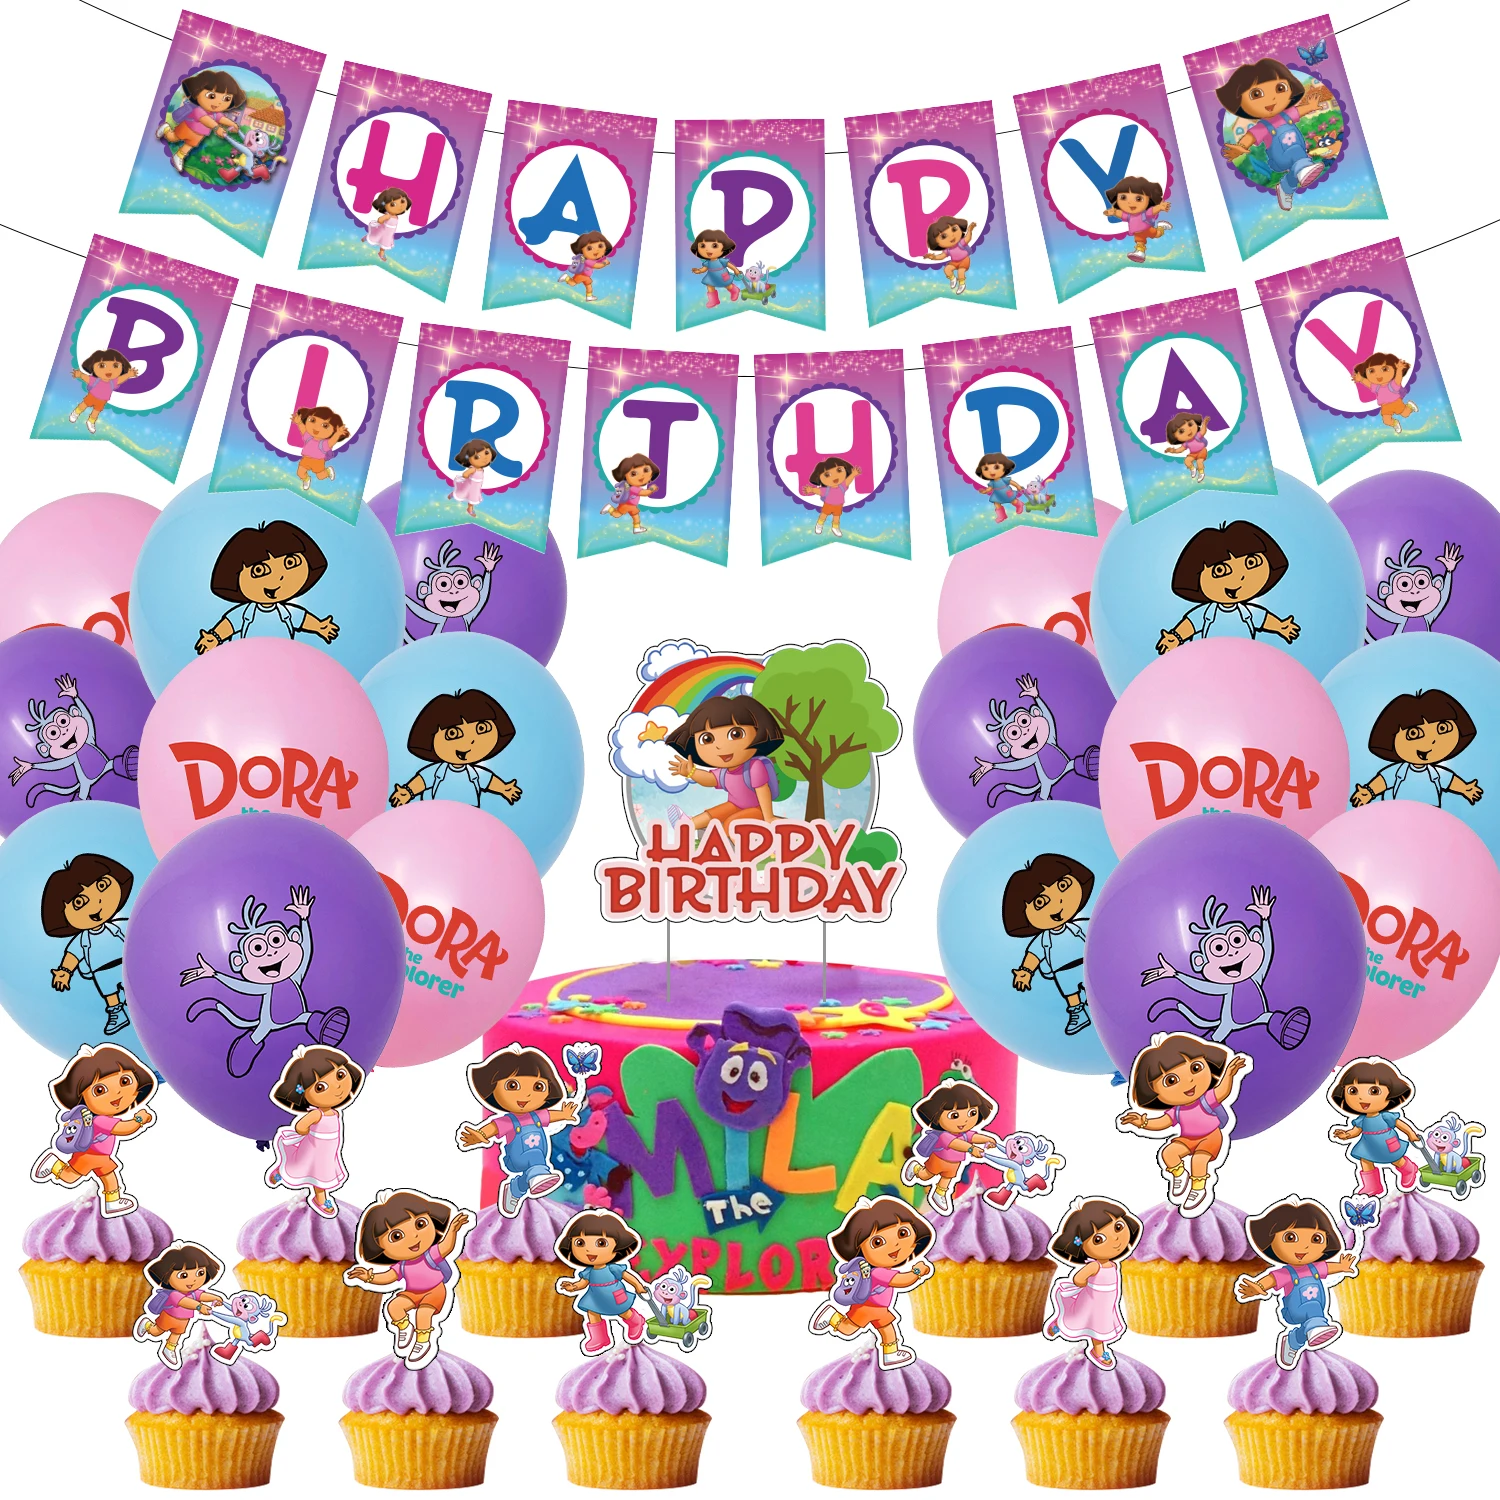 Lanyard Dora the Explorer Collection Party Accessory